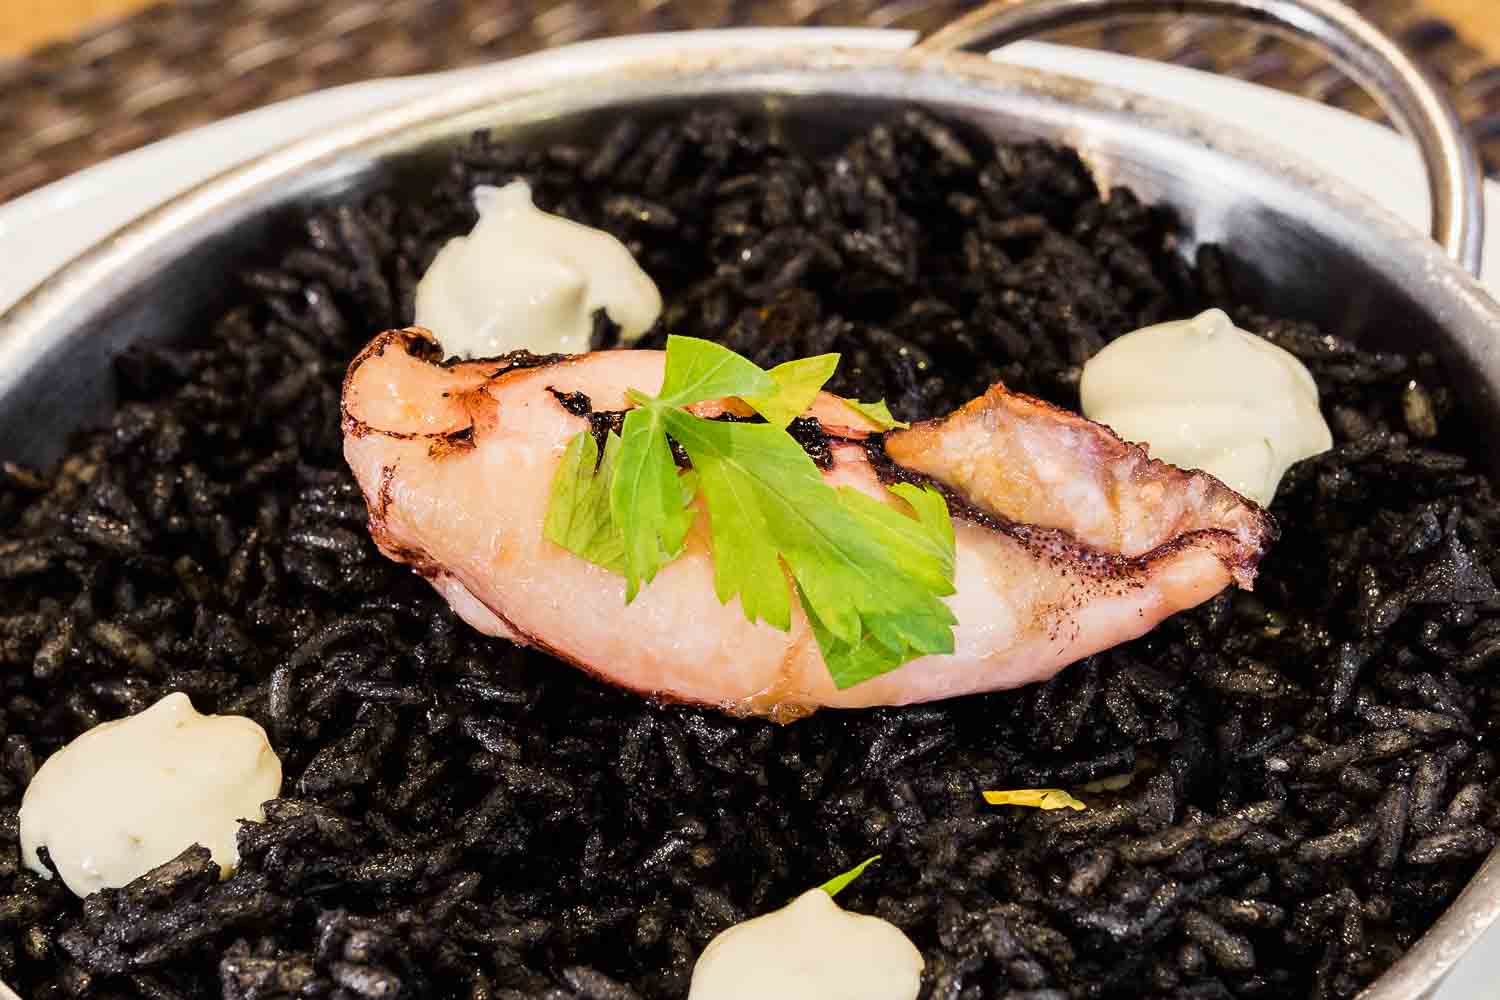 Black rice with cuttlefish (Price per person)